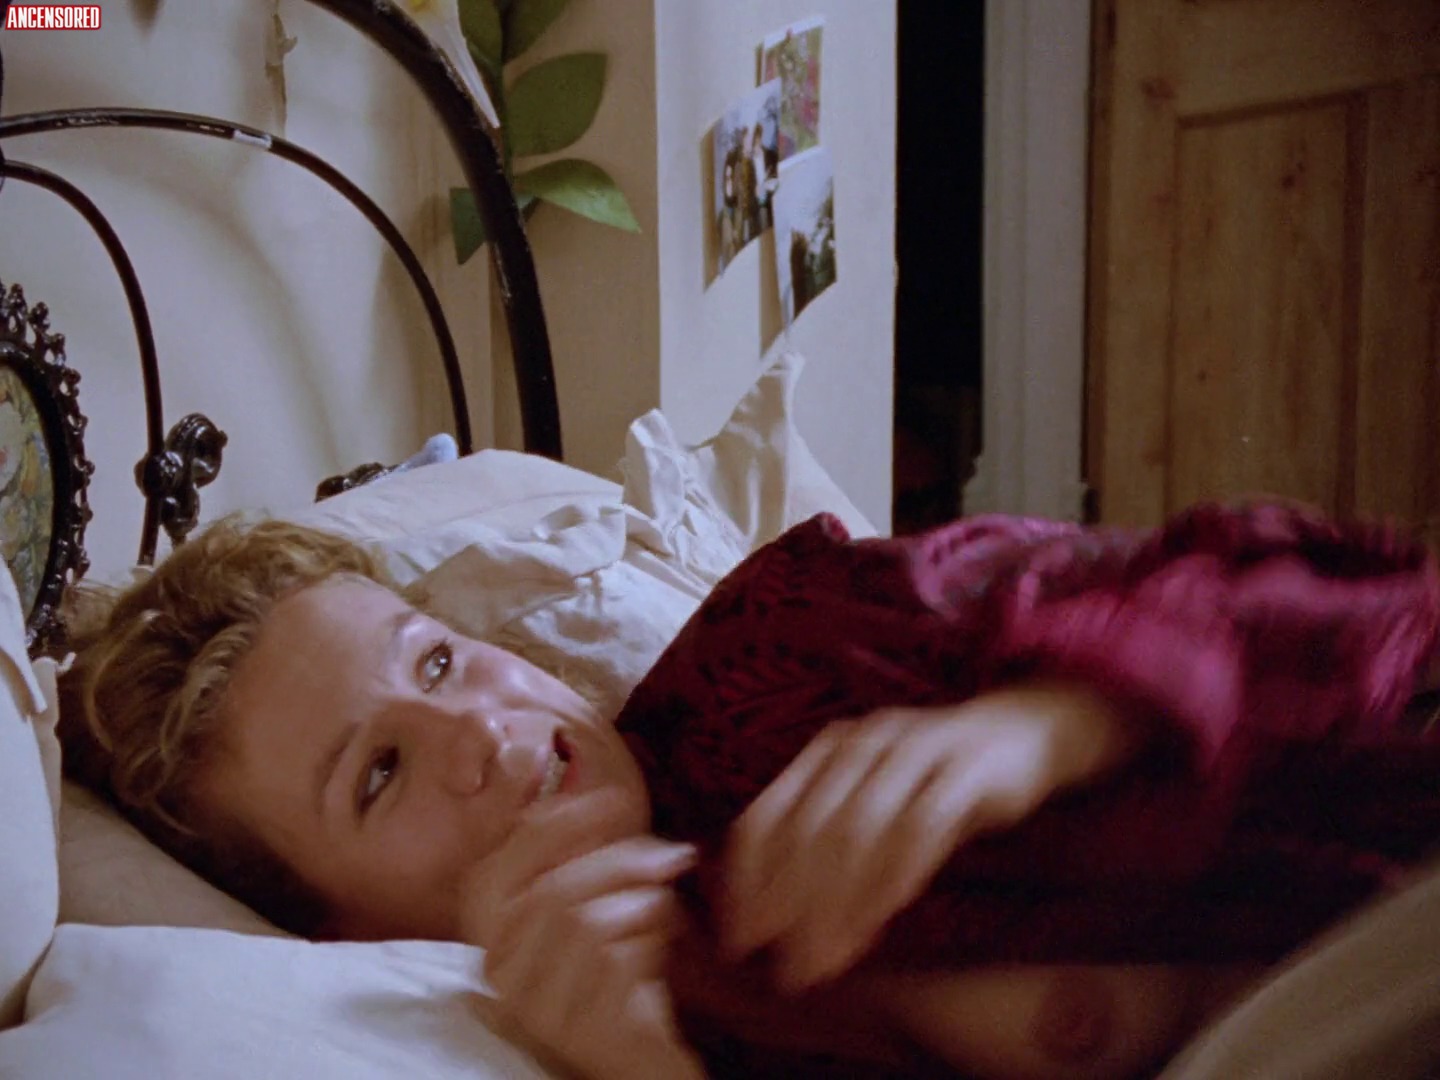 Naked Juliet Stevenson in Truly Madly Deeply < ANCENSORED